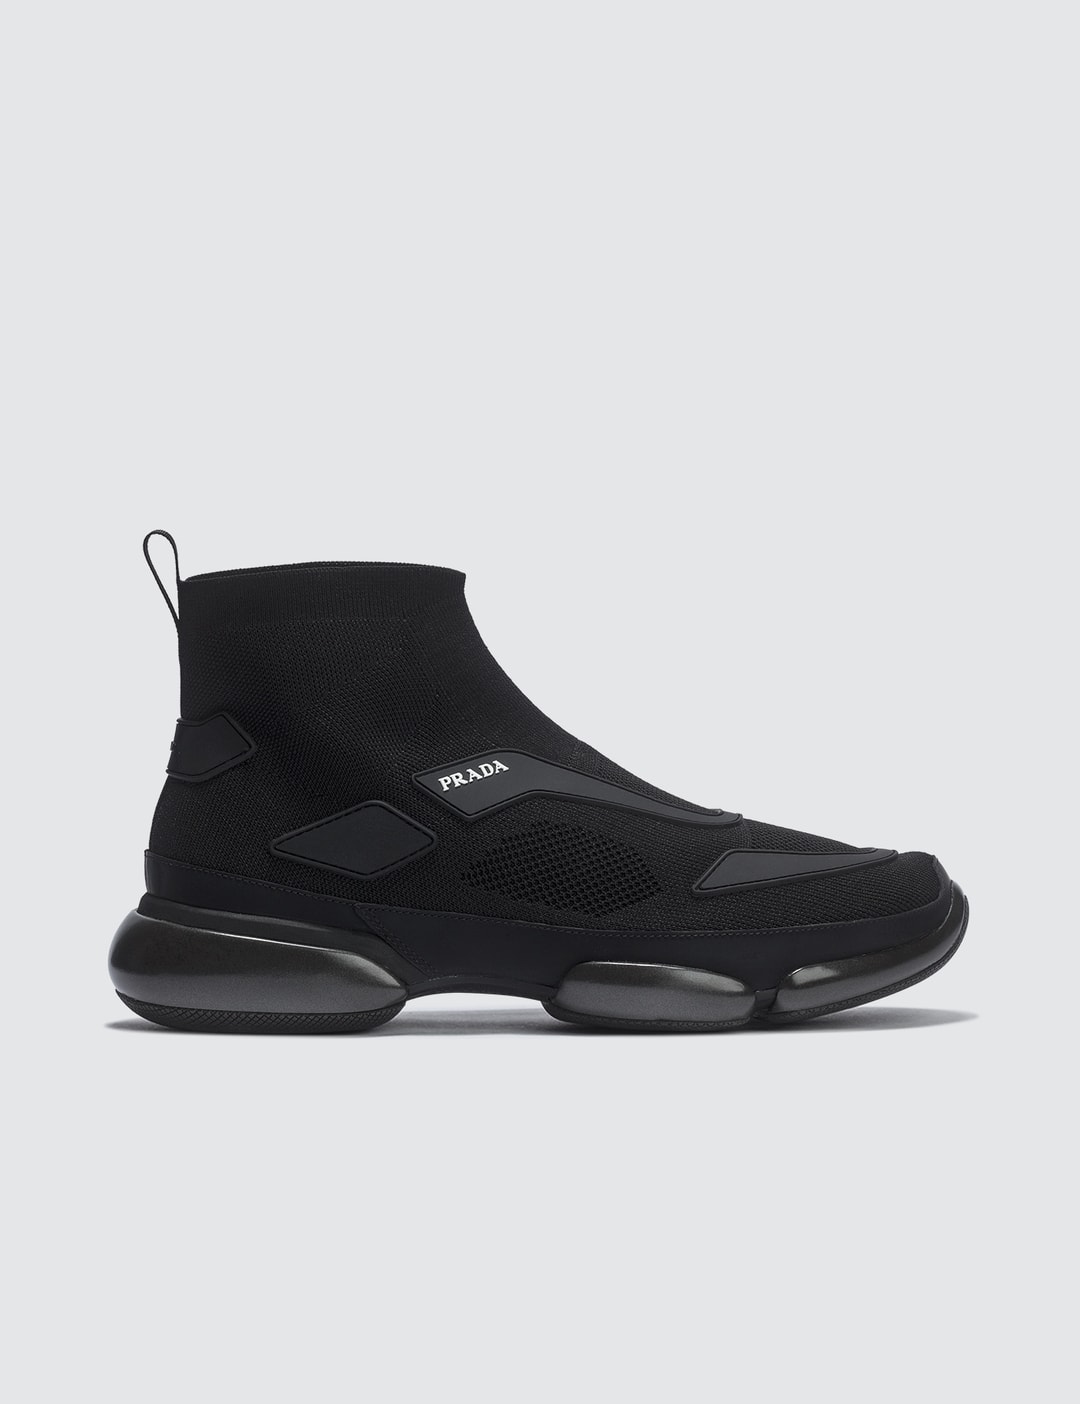 Prada - Sock Cloudbust Sneaker | HBX - Globally Curated Fashion and  Lifestyle by Hypebeast